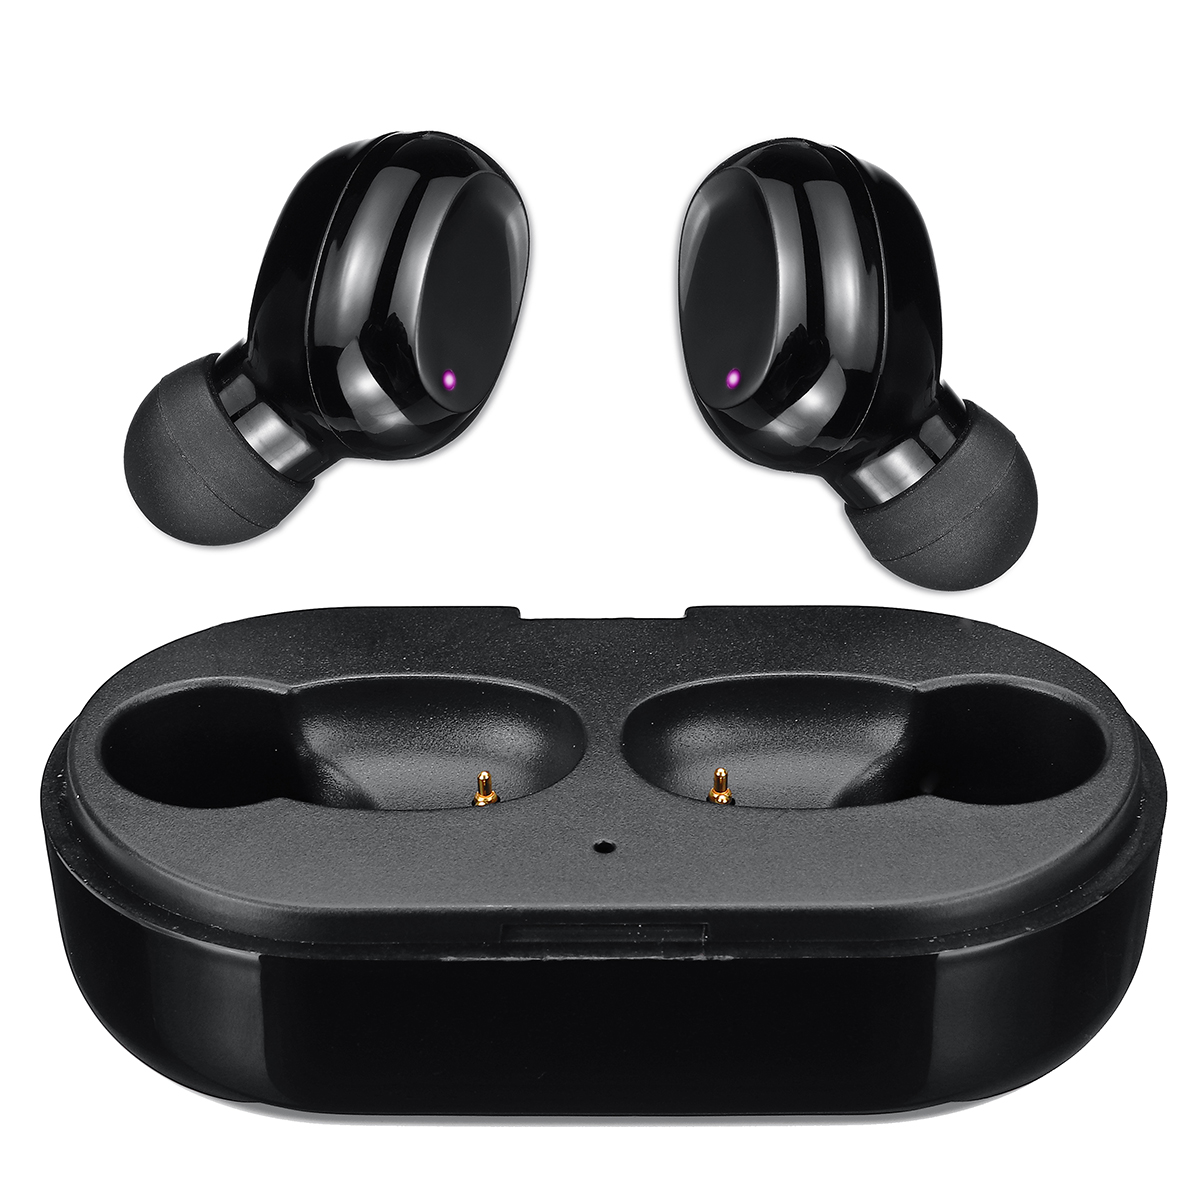 

[bluetooth 5.0] TWS True Wireless Earbuds Noise Cancelling Touch Control IPX6 Waterproof Stereo Earphone with Mic